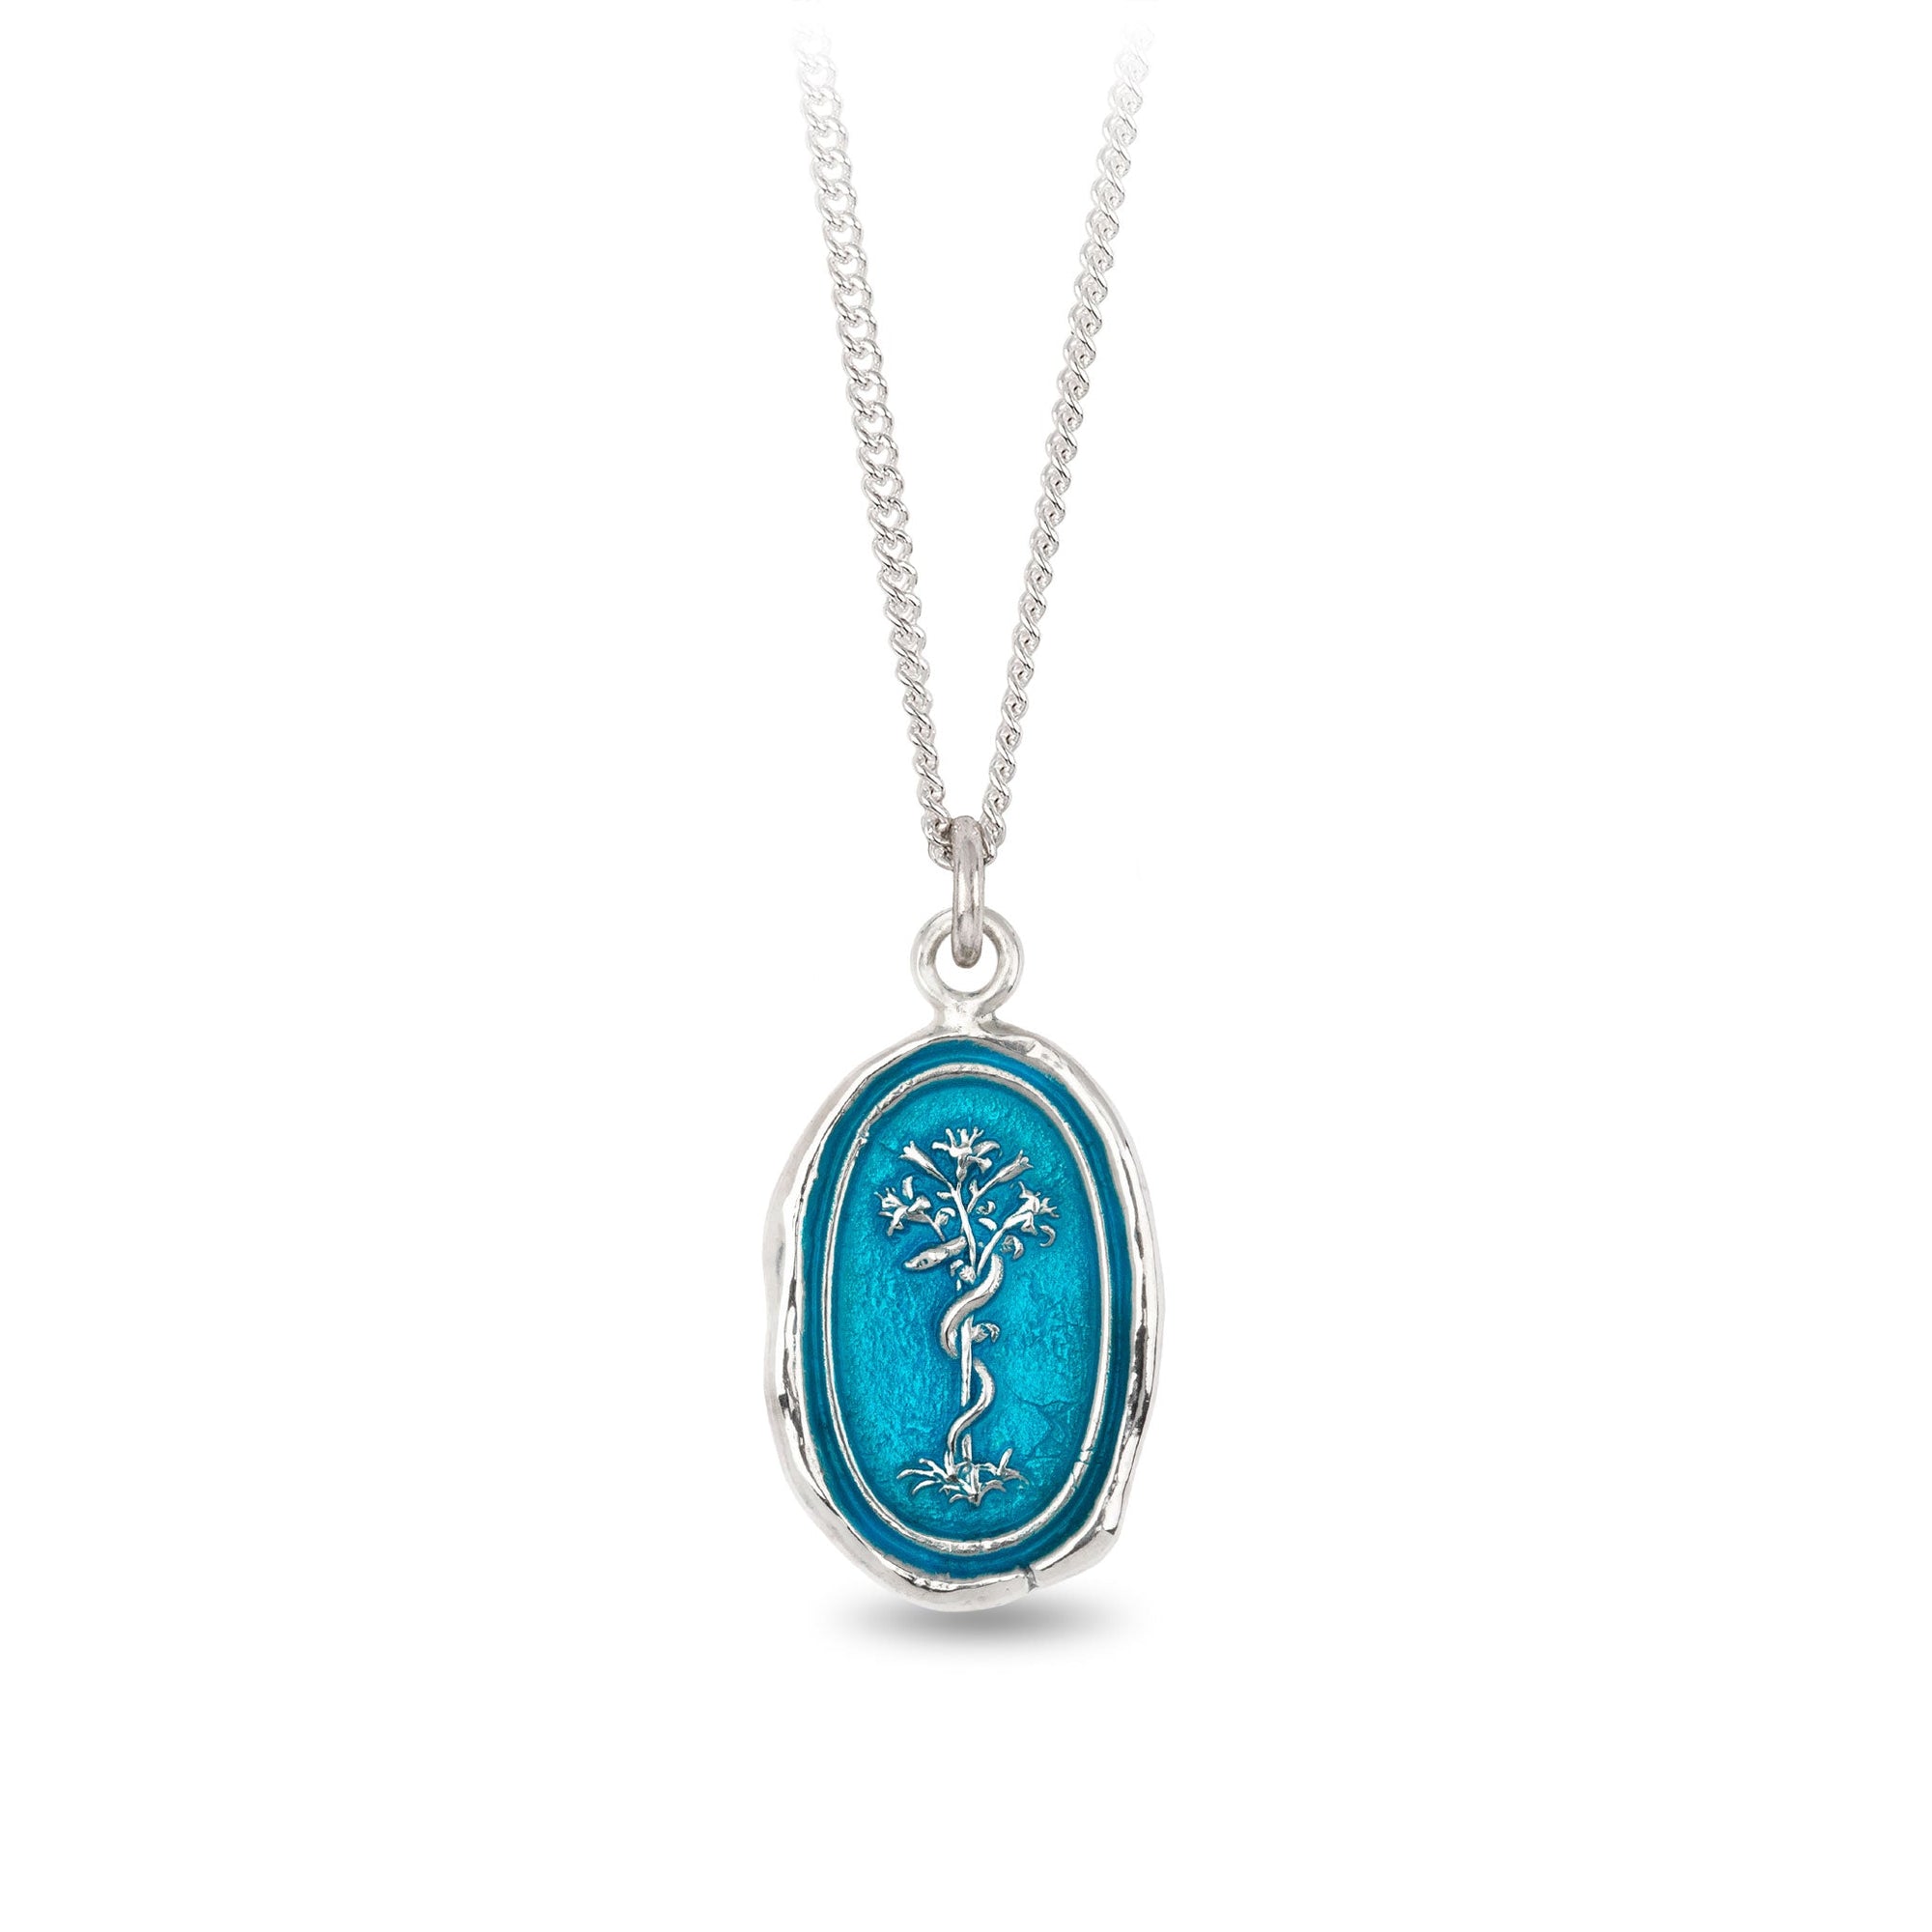 Heal From Within Talisman - Capri Blue